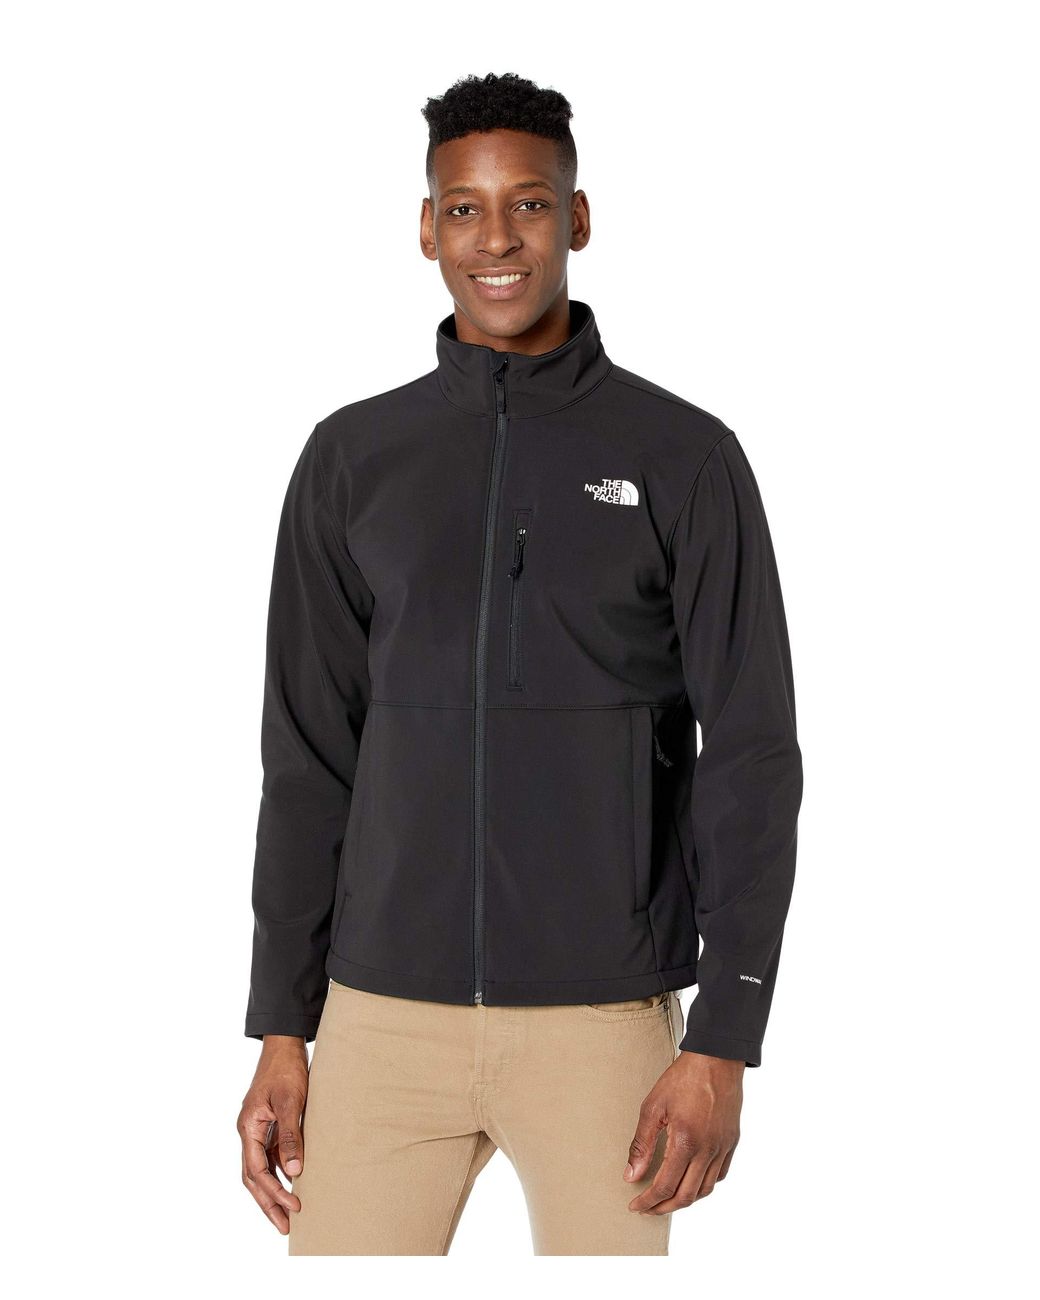 The North Face Synthetic Apex Bionic 2 Jacket in Black for Men - Lyst